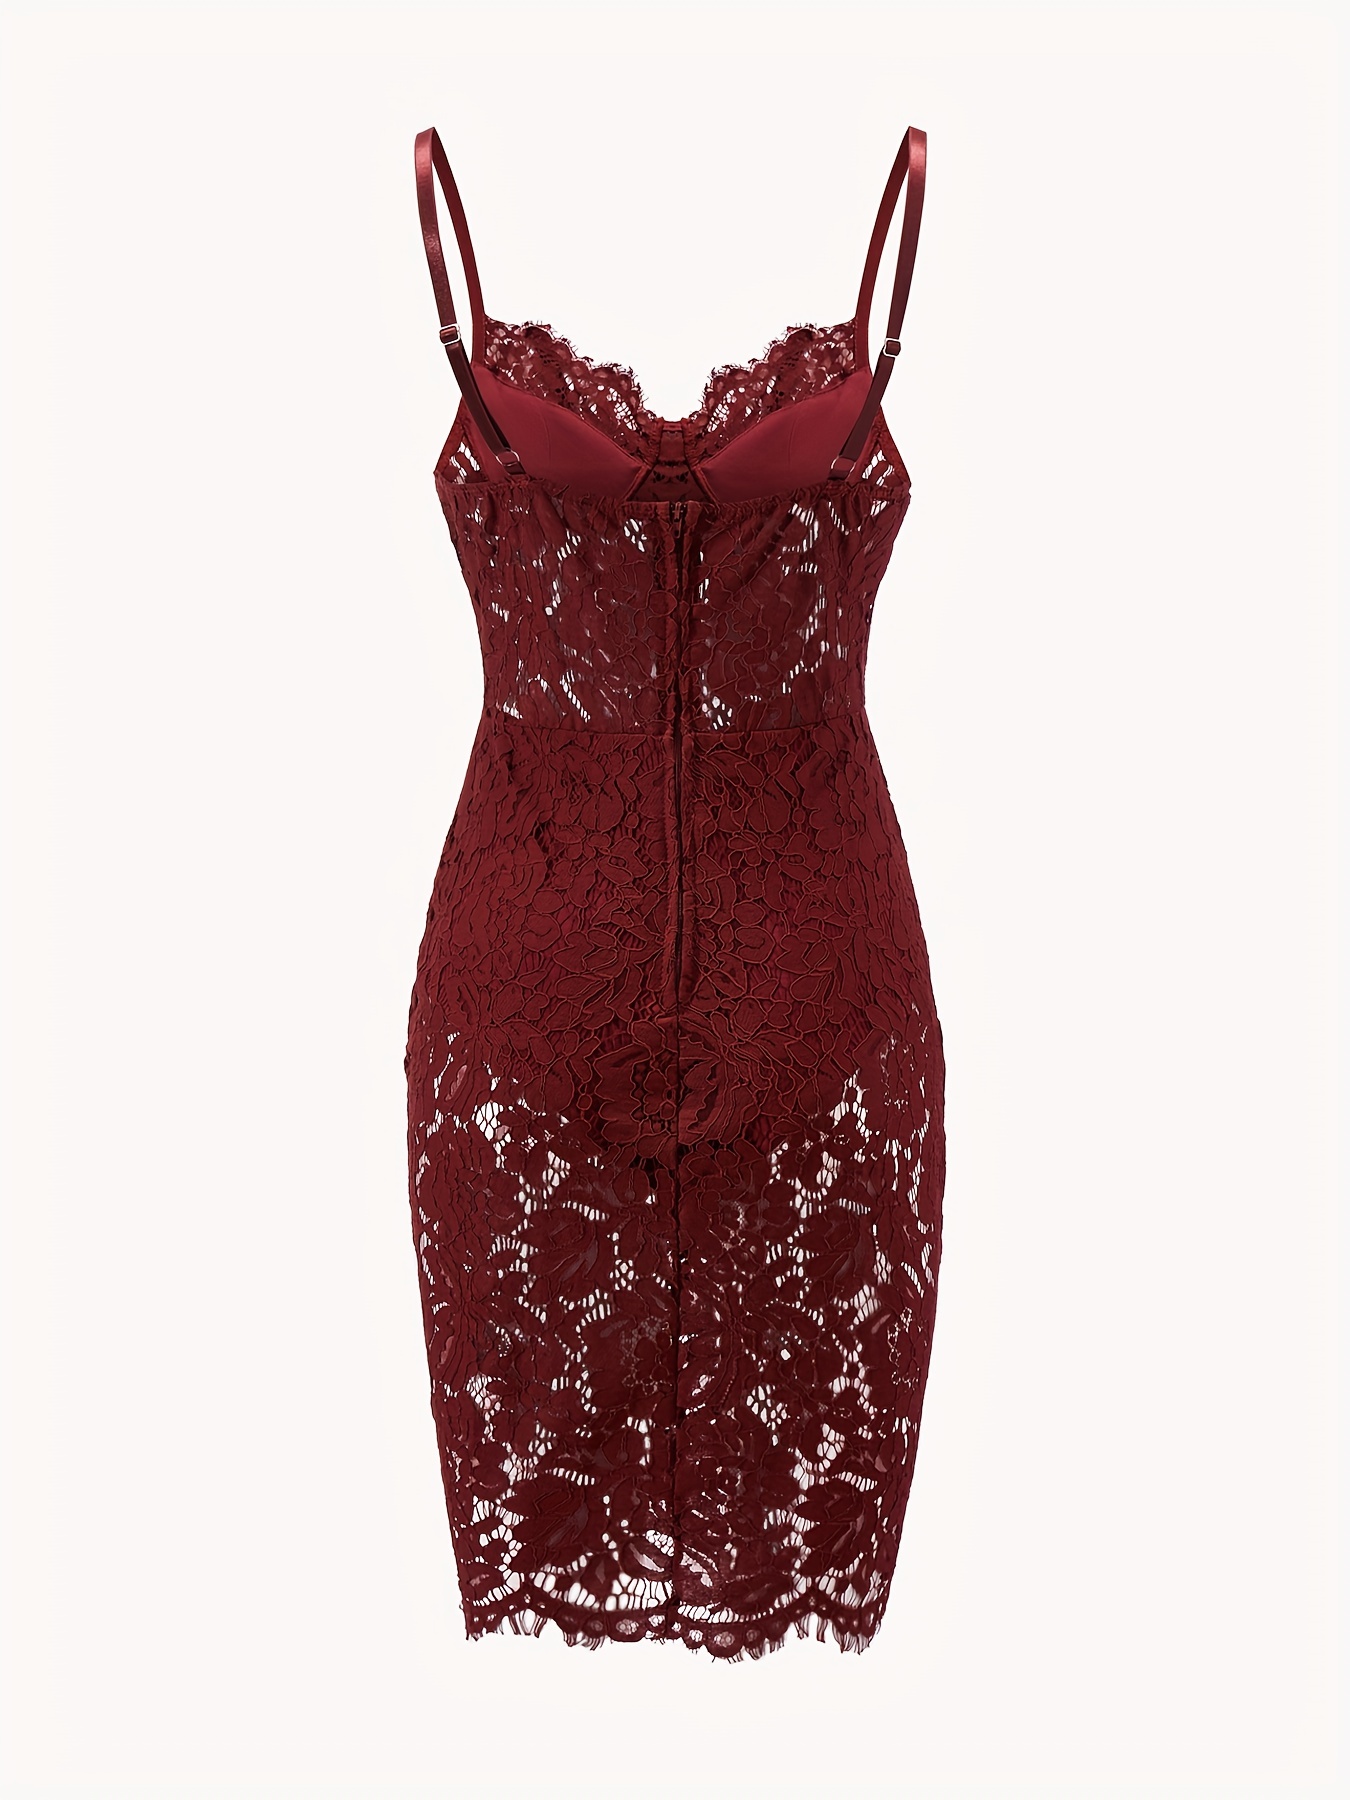 Express, Dresses, Express Red Lace Bodycon Dress